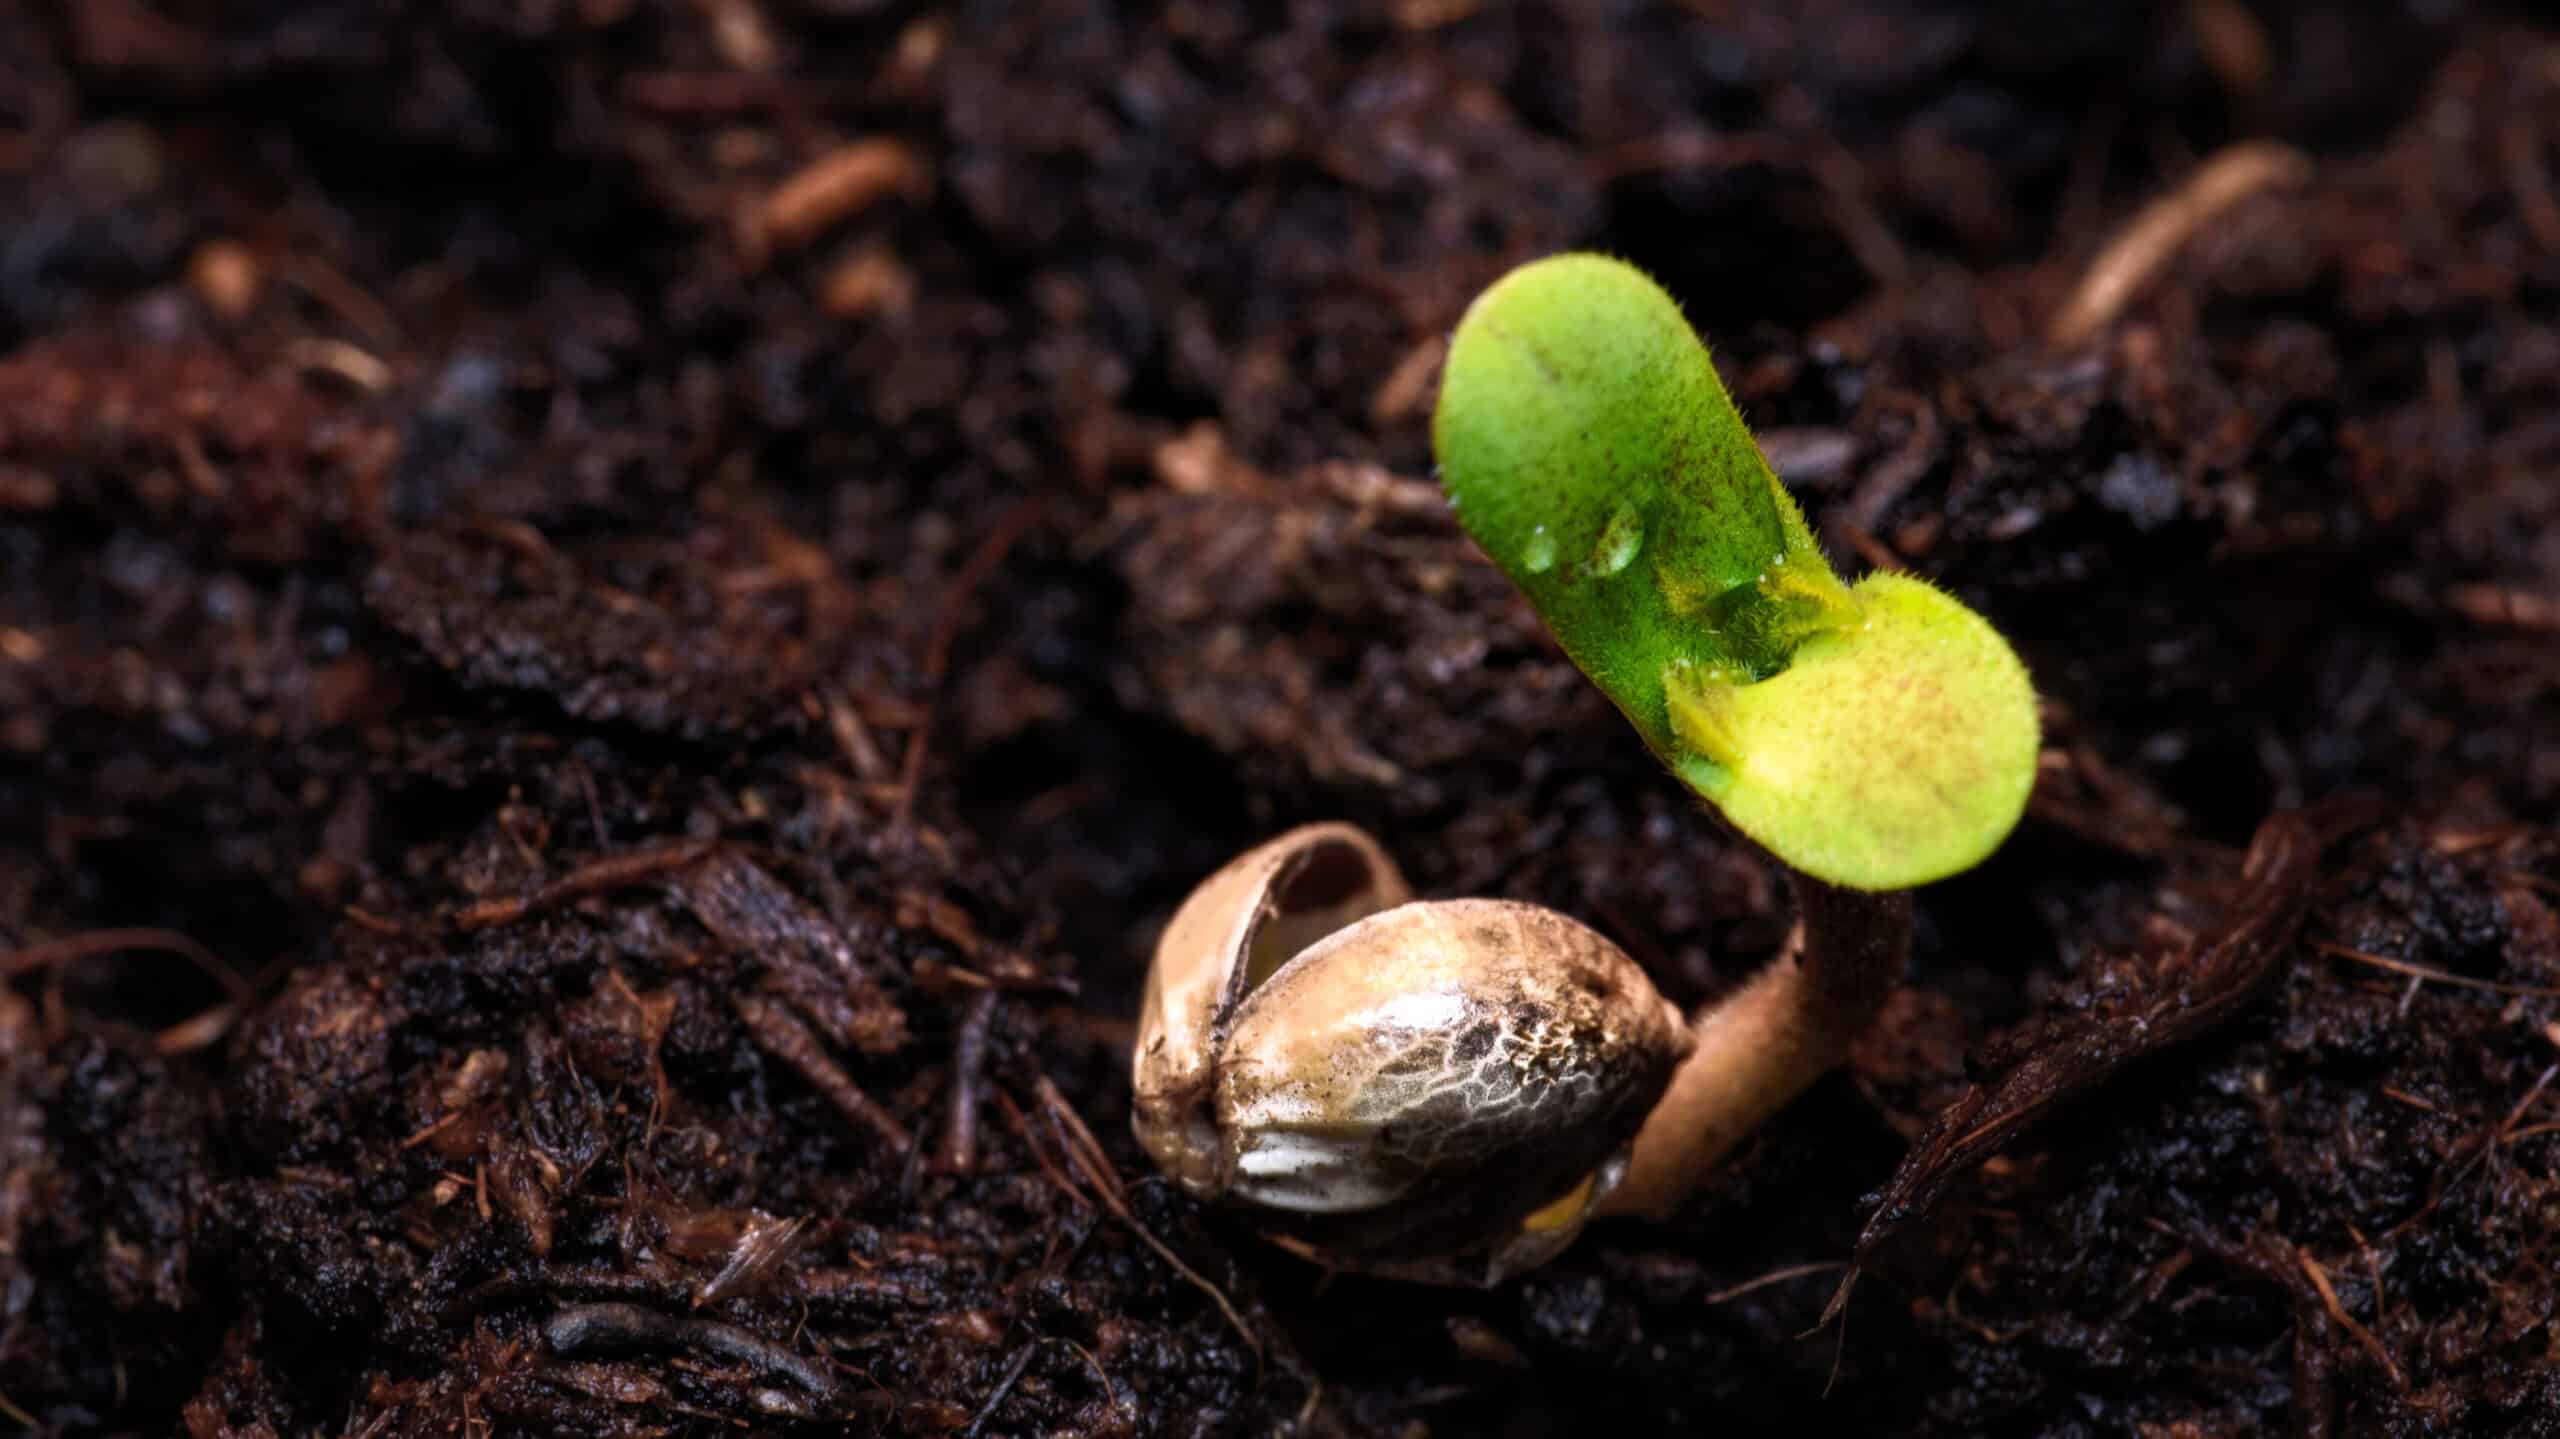 A newly-sprouted cannabis seed on damp soil. The first pair of leaves are open. This is the beginning of the life cycle of cannabis in the wild begins with 